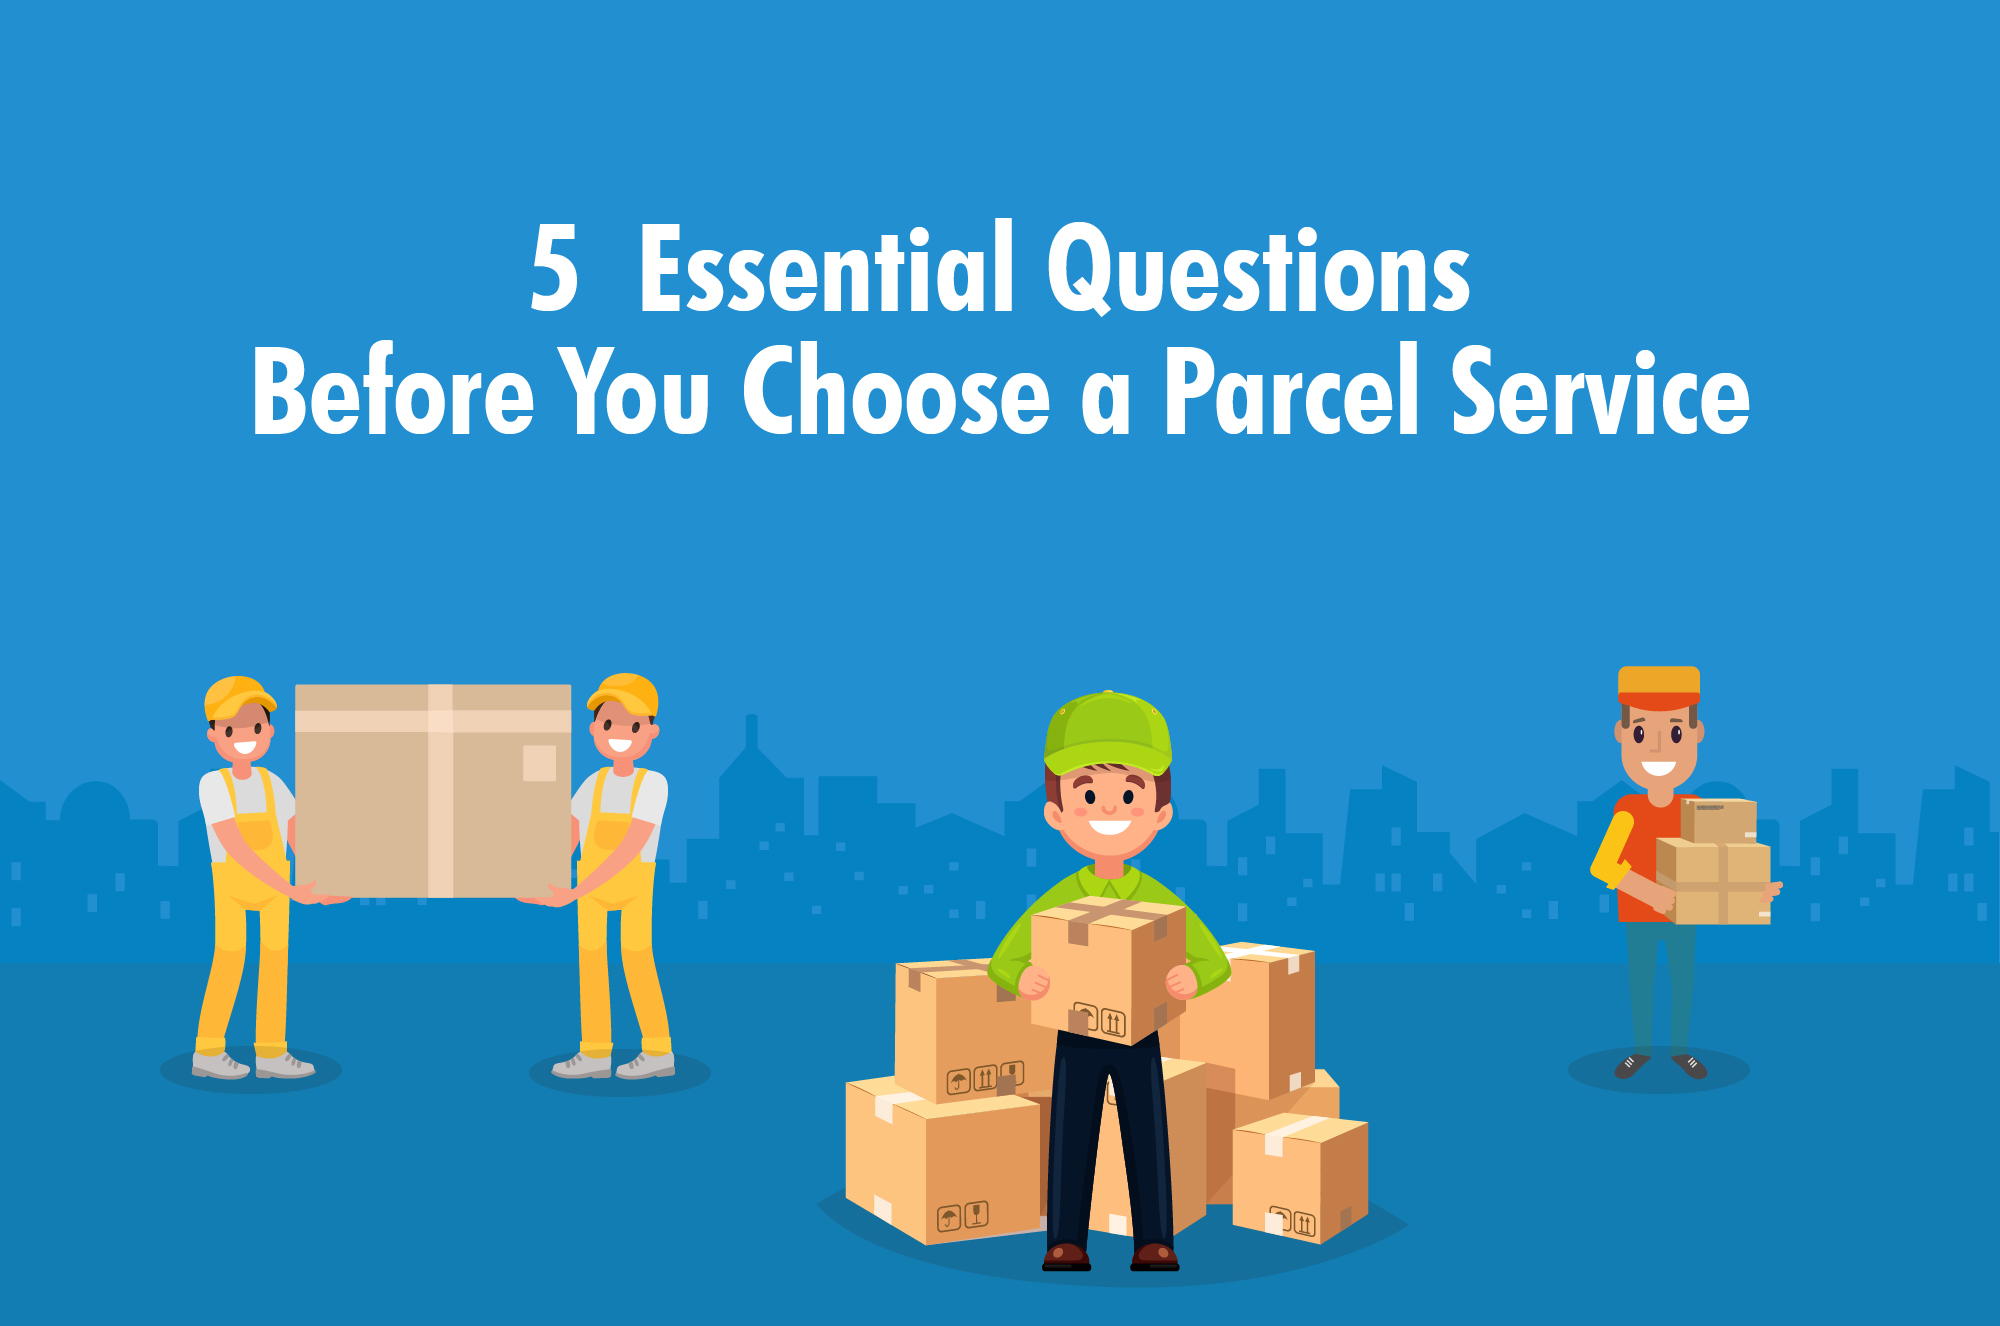 5 Essential Questions Before You Choose a Parcel Service